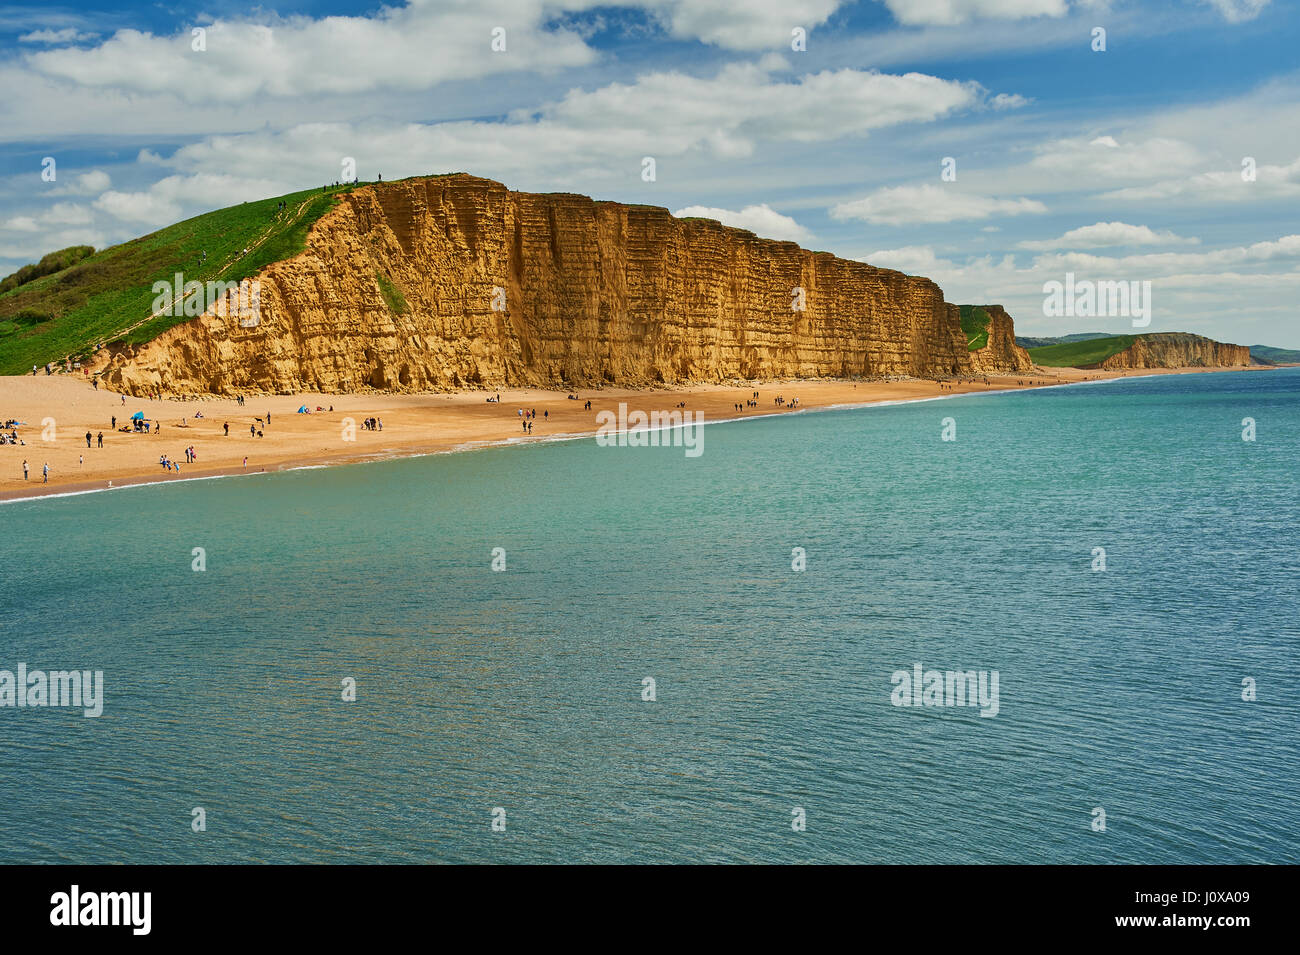 Sandstone cliffs of East cliff at the Dorset seaside town of West Bay. The iconic cliffs are on the Jurassic Coast and are some 150 million years old. Stock Photo